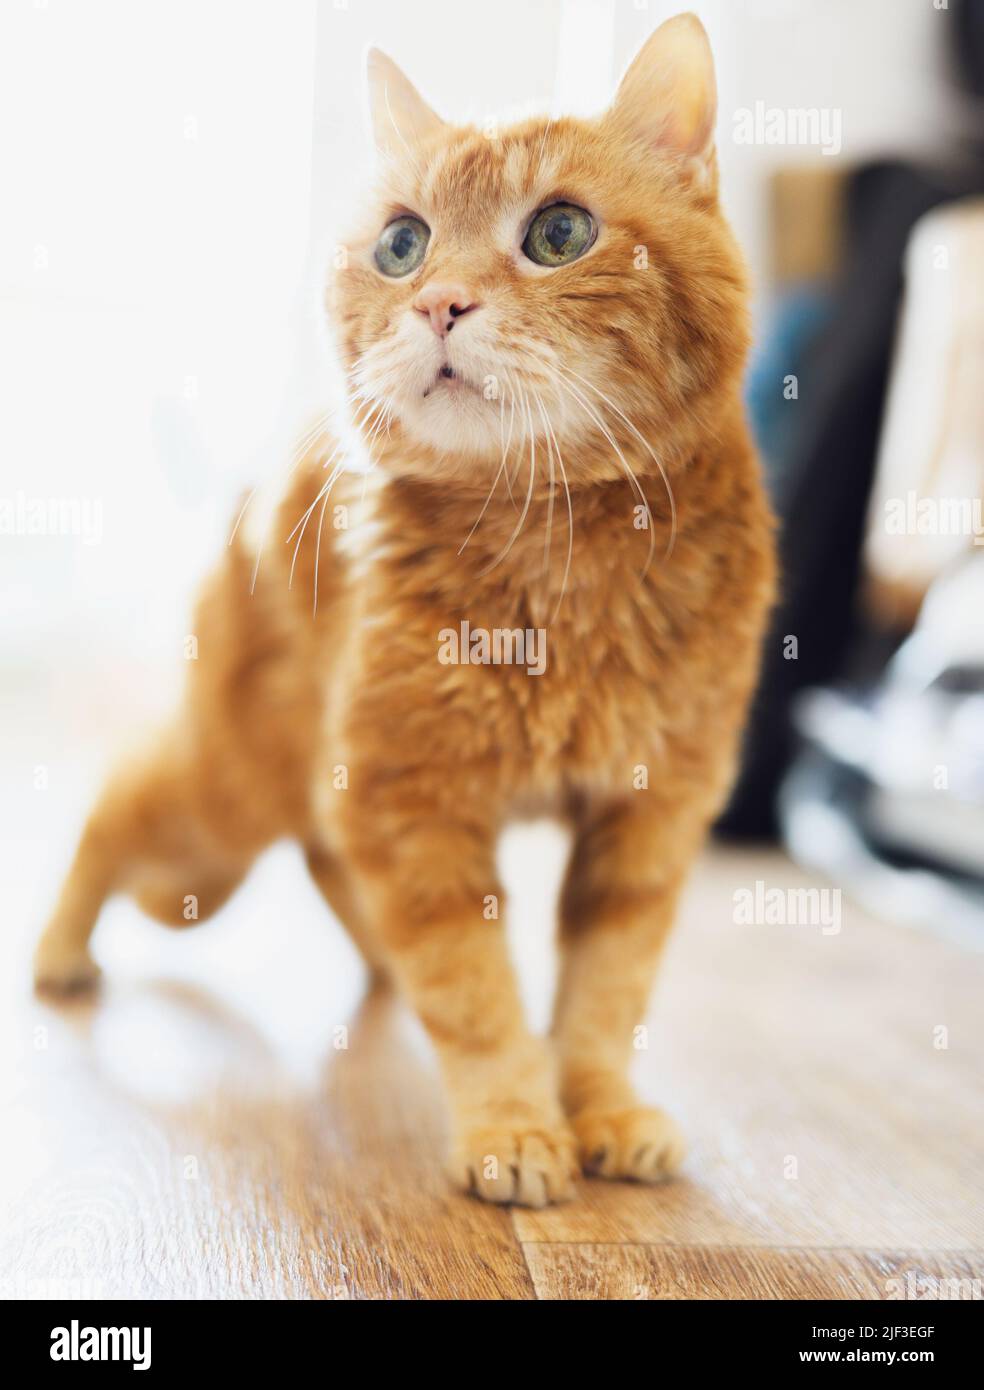 Beautiful ginger cat. Selective focus on eyes. Stock Photo